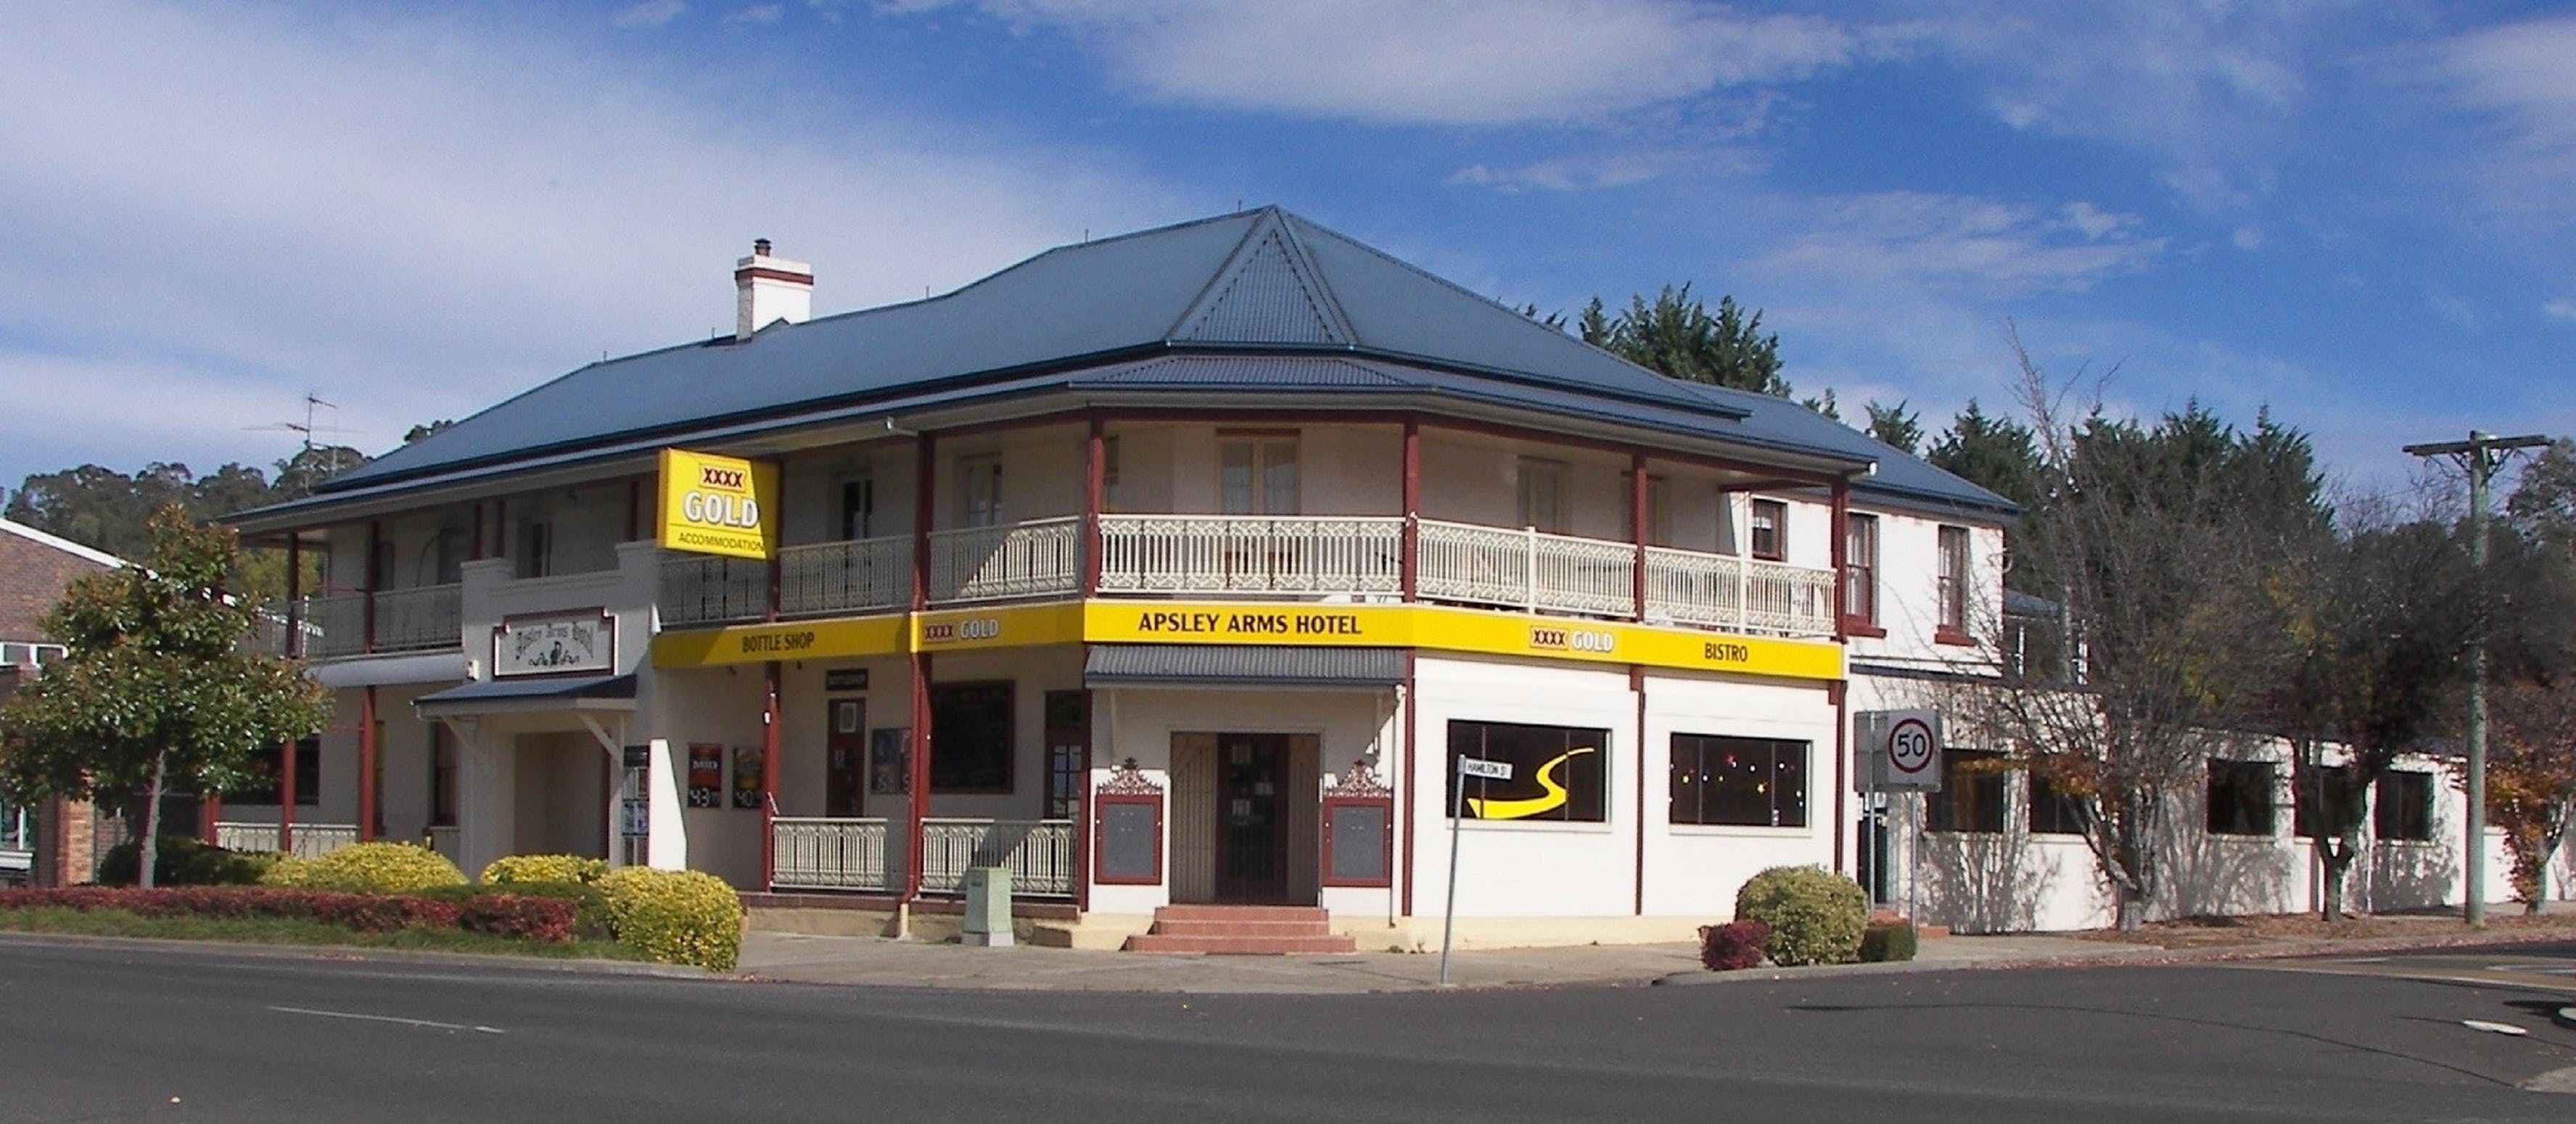 Apsley Arms Hotel - Accommodation in Brisbane